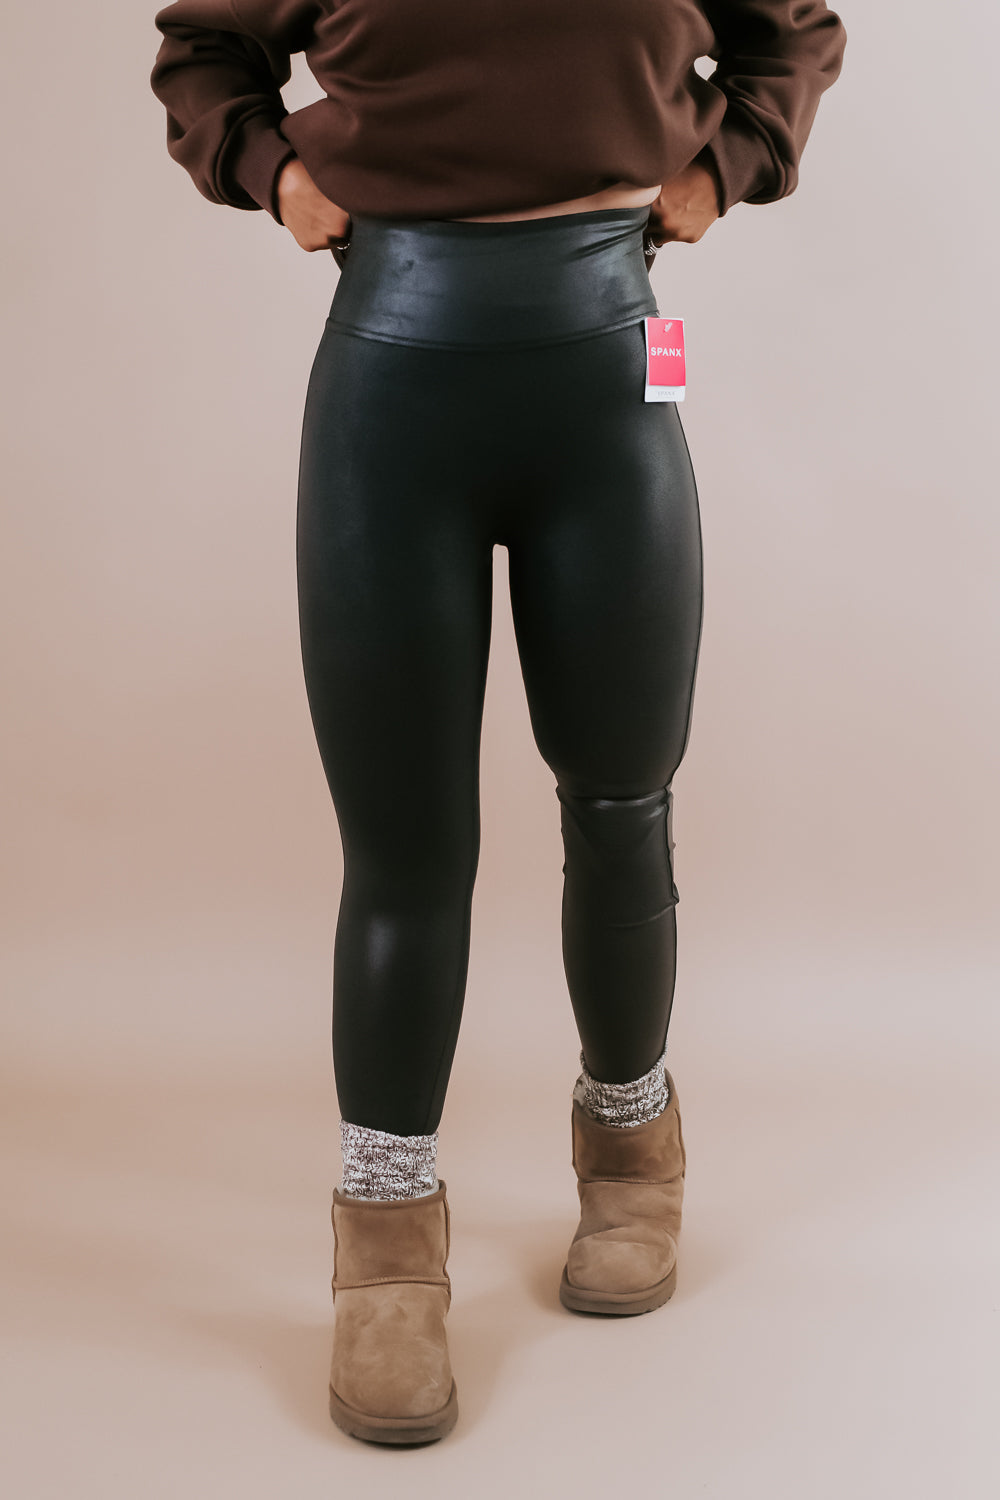 Changing Seasons Faux Leather High Waist Legging In Black Curves